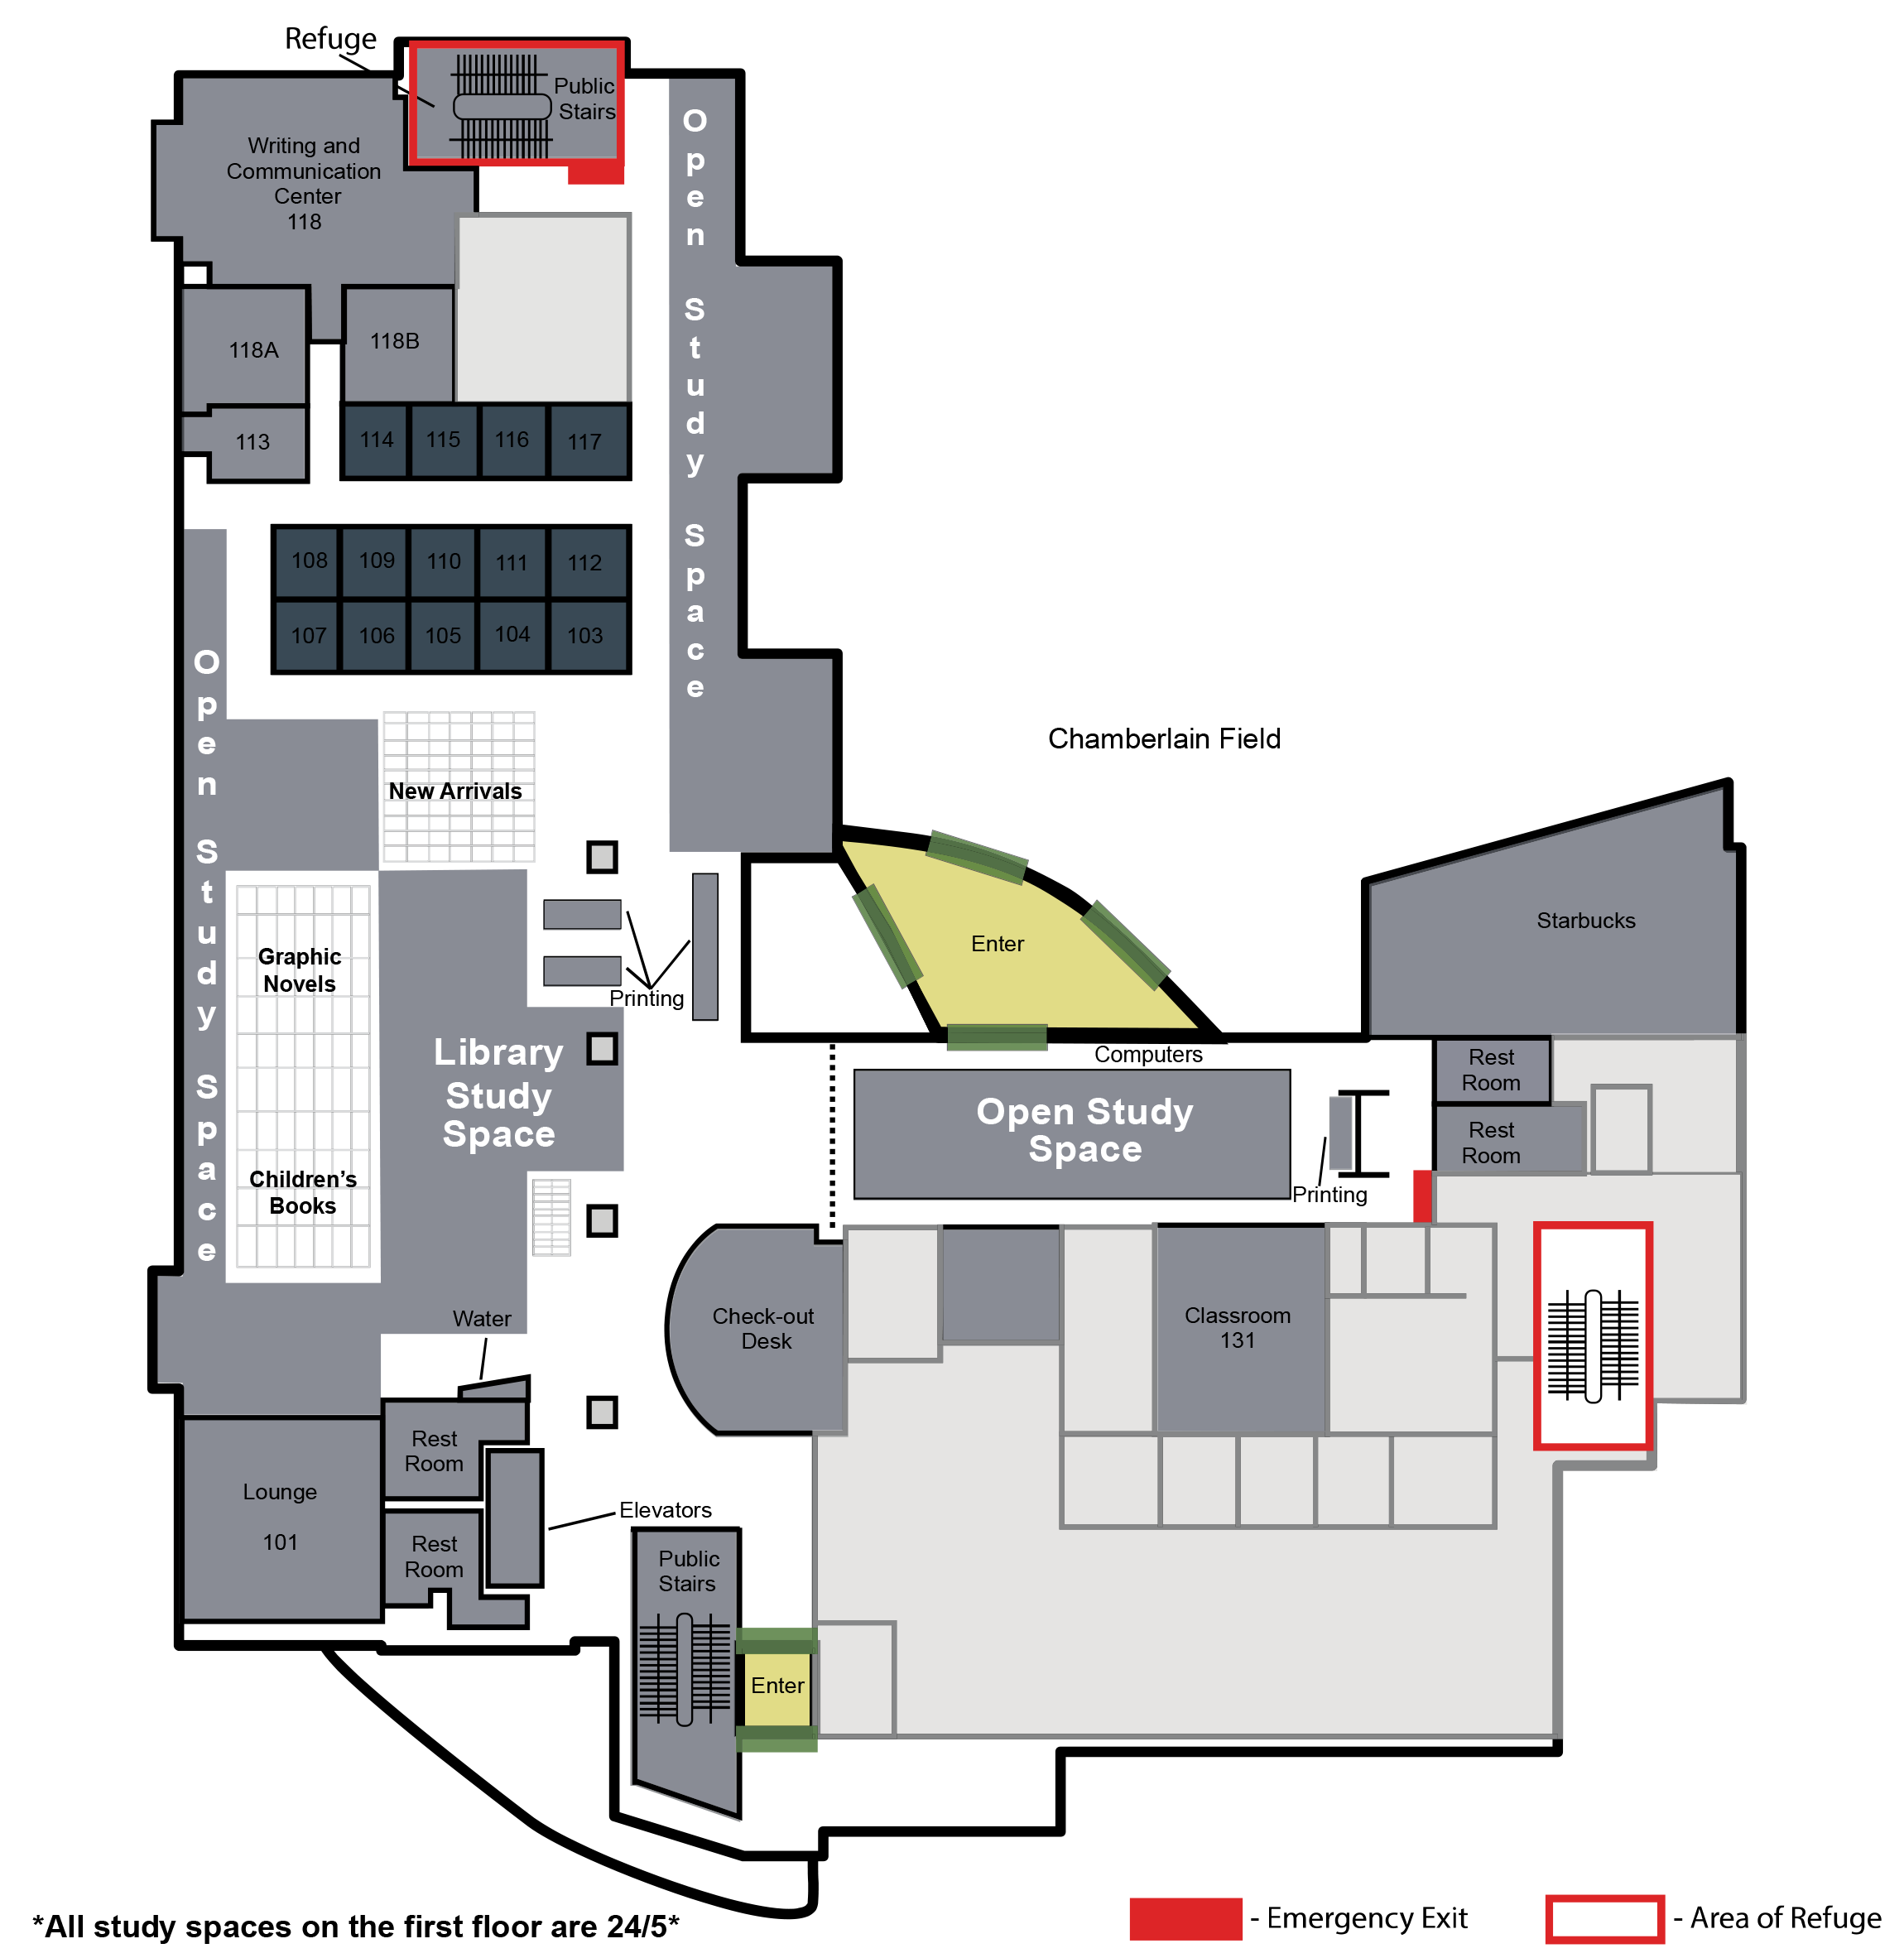 A map of the first floor of the library